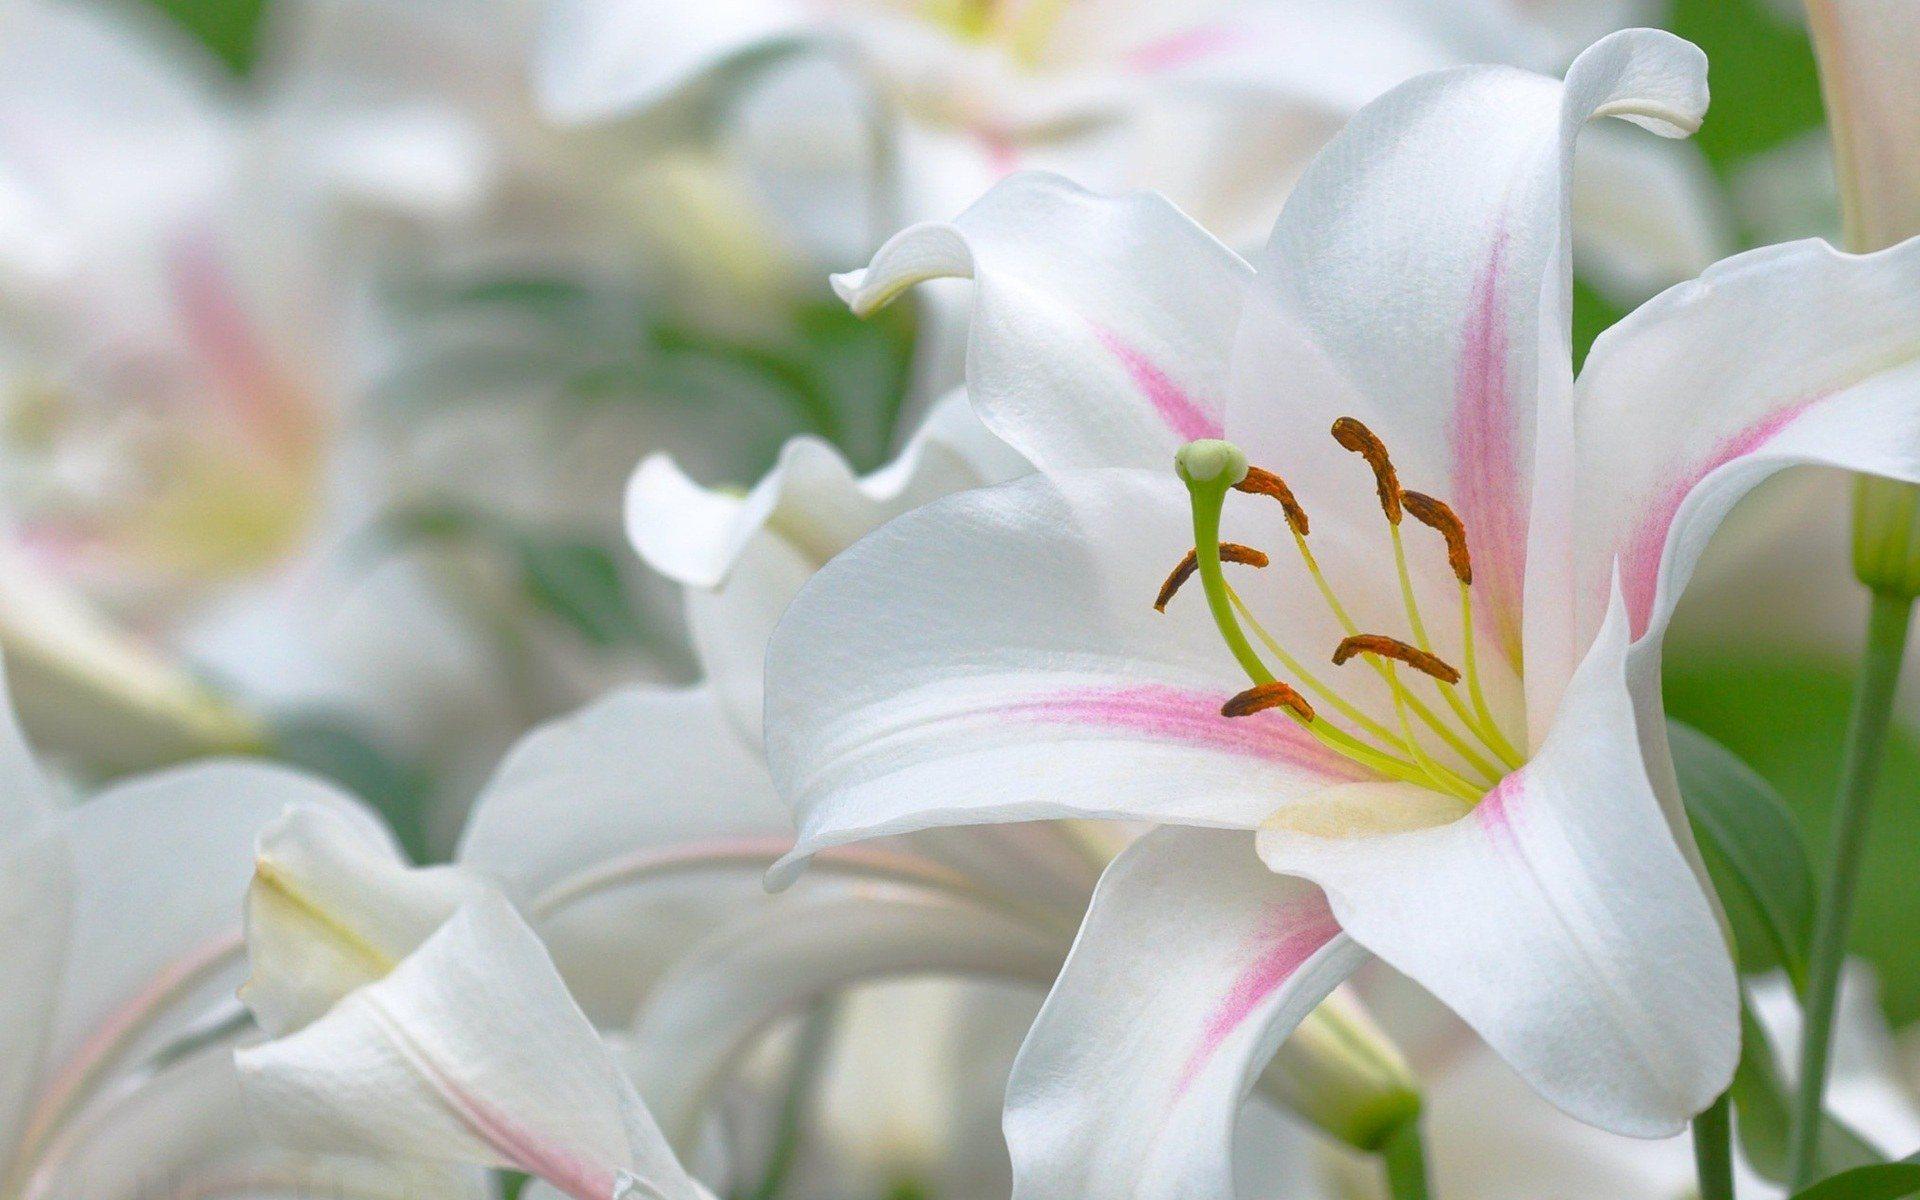 HQ 1920x1200 Resolution, 31 07 Easter Lily